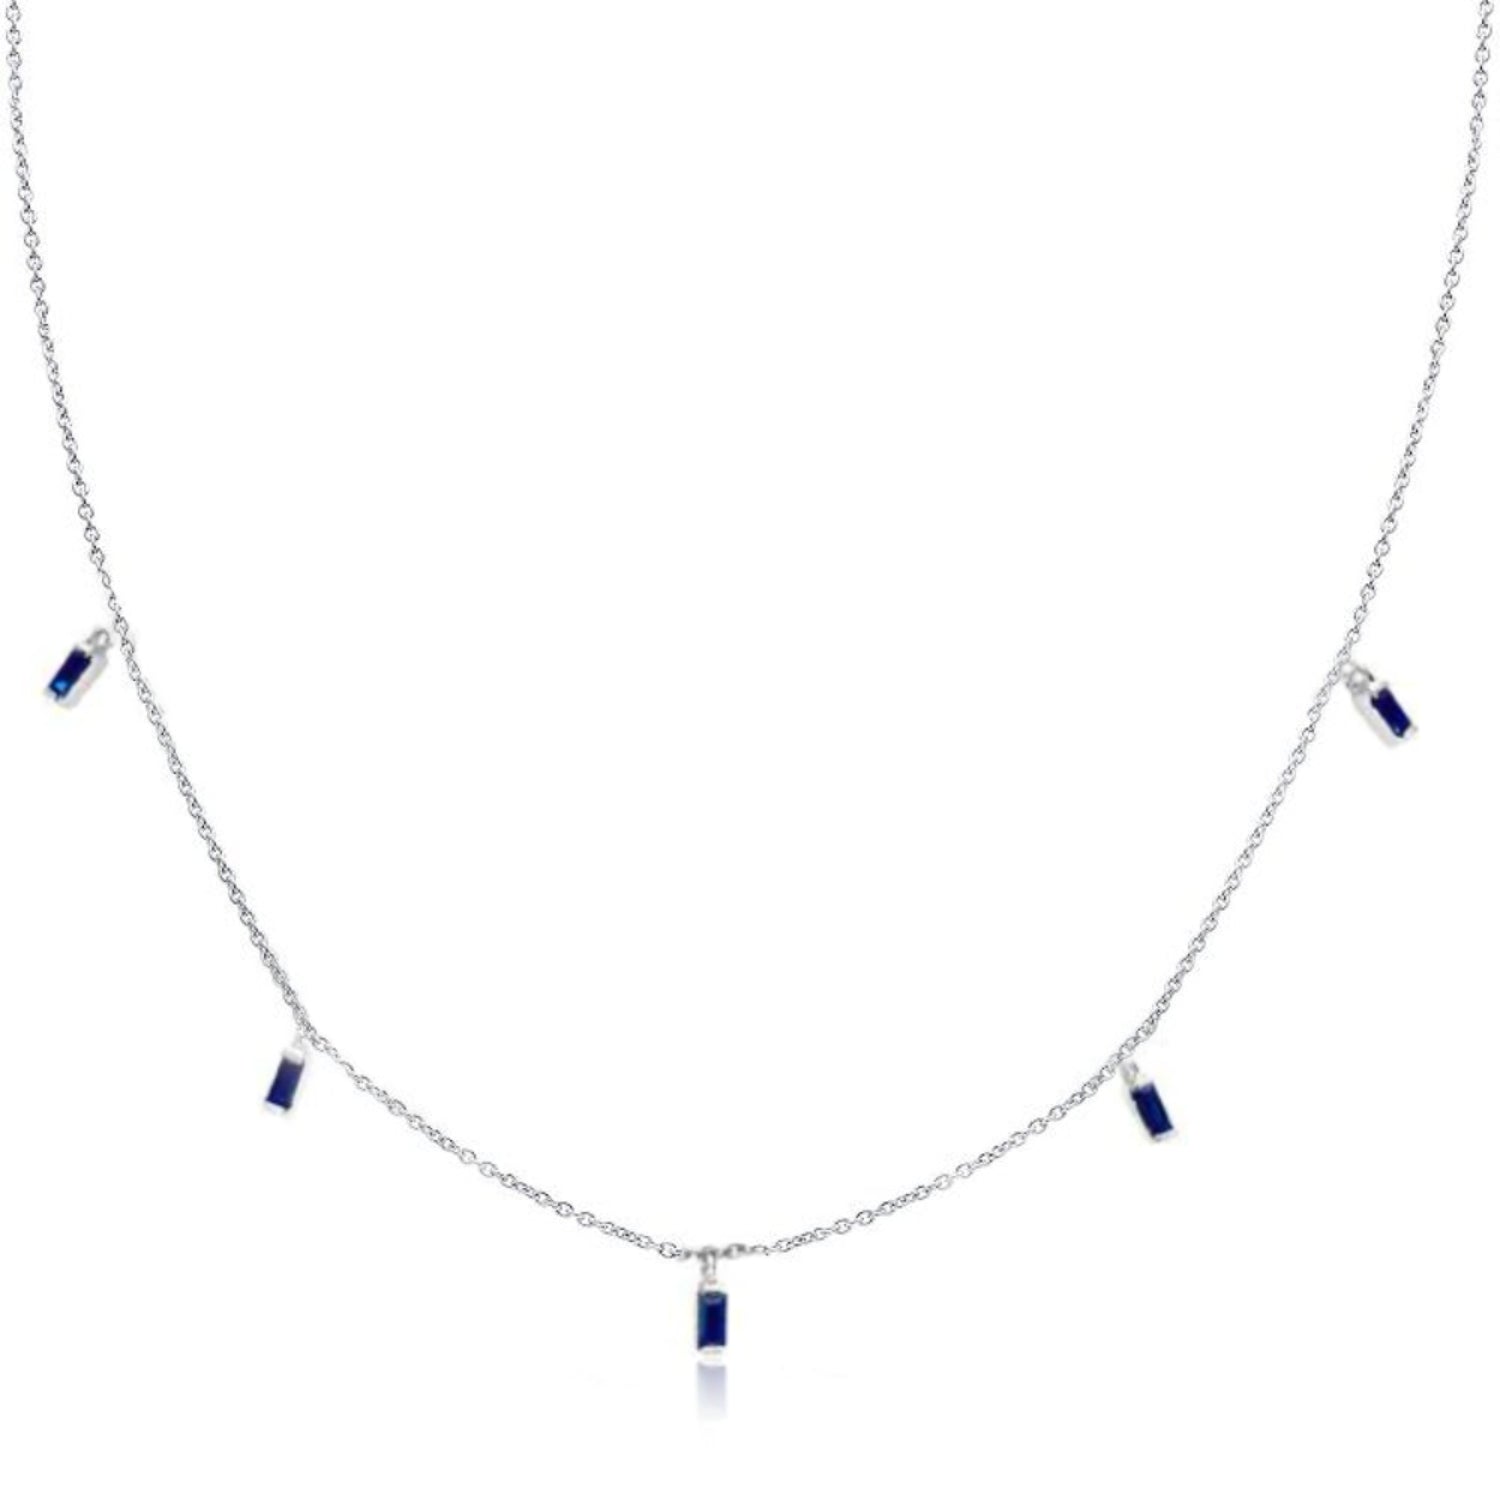 Floating Baguette Cut Blue Sapphire Necklace in White Gold